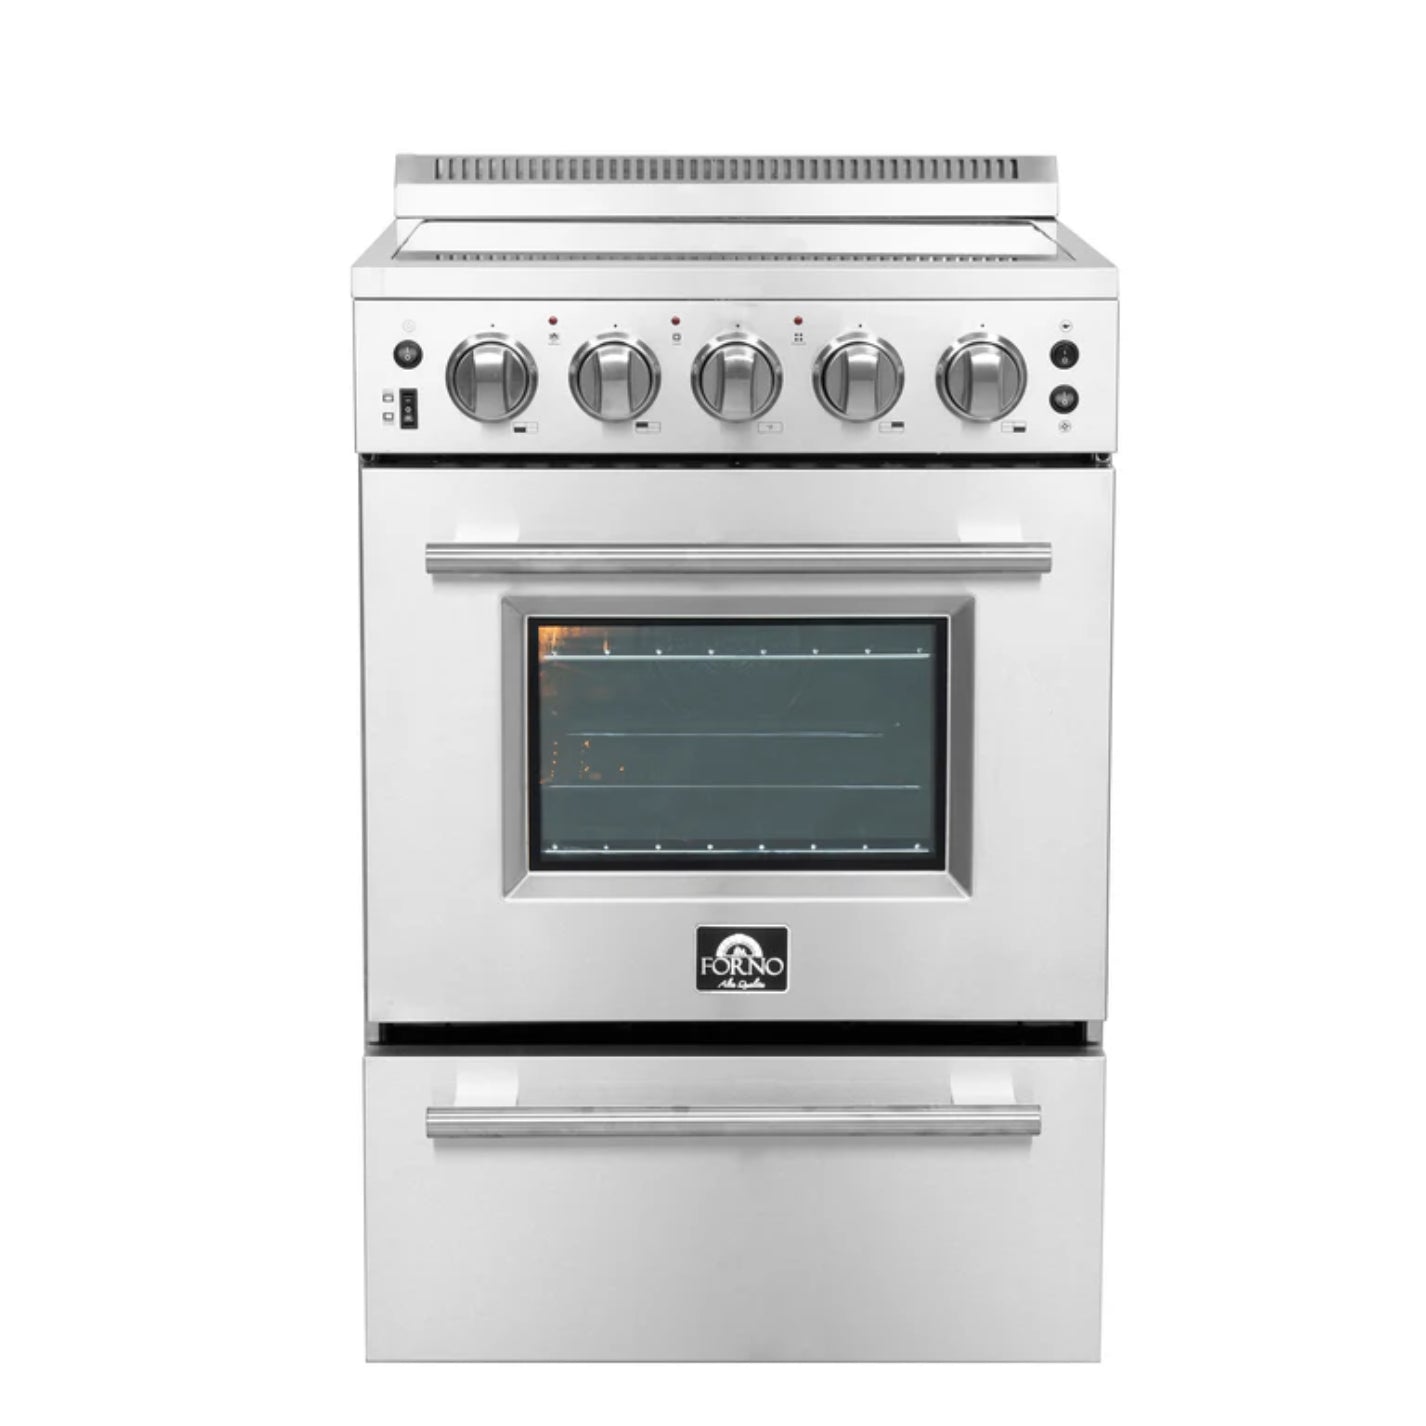 Forno Loiano 24-inch Freestanding Electric Range Stainless Steel, 4 Elements,  2.3 cu.ft. with Storage Drawer, FFSEL6069-24